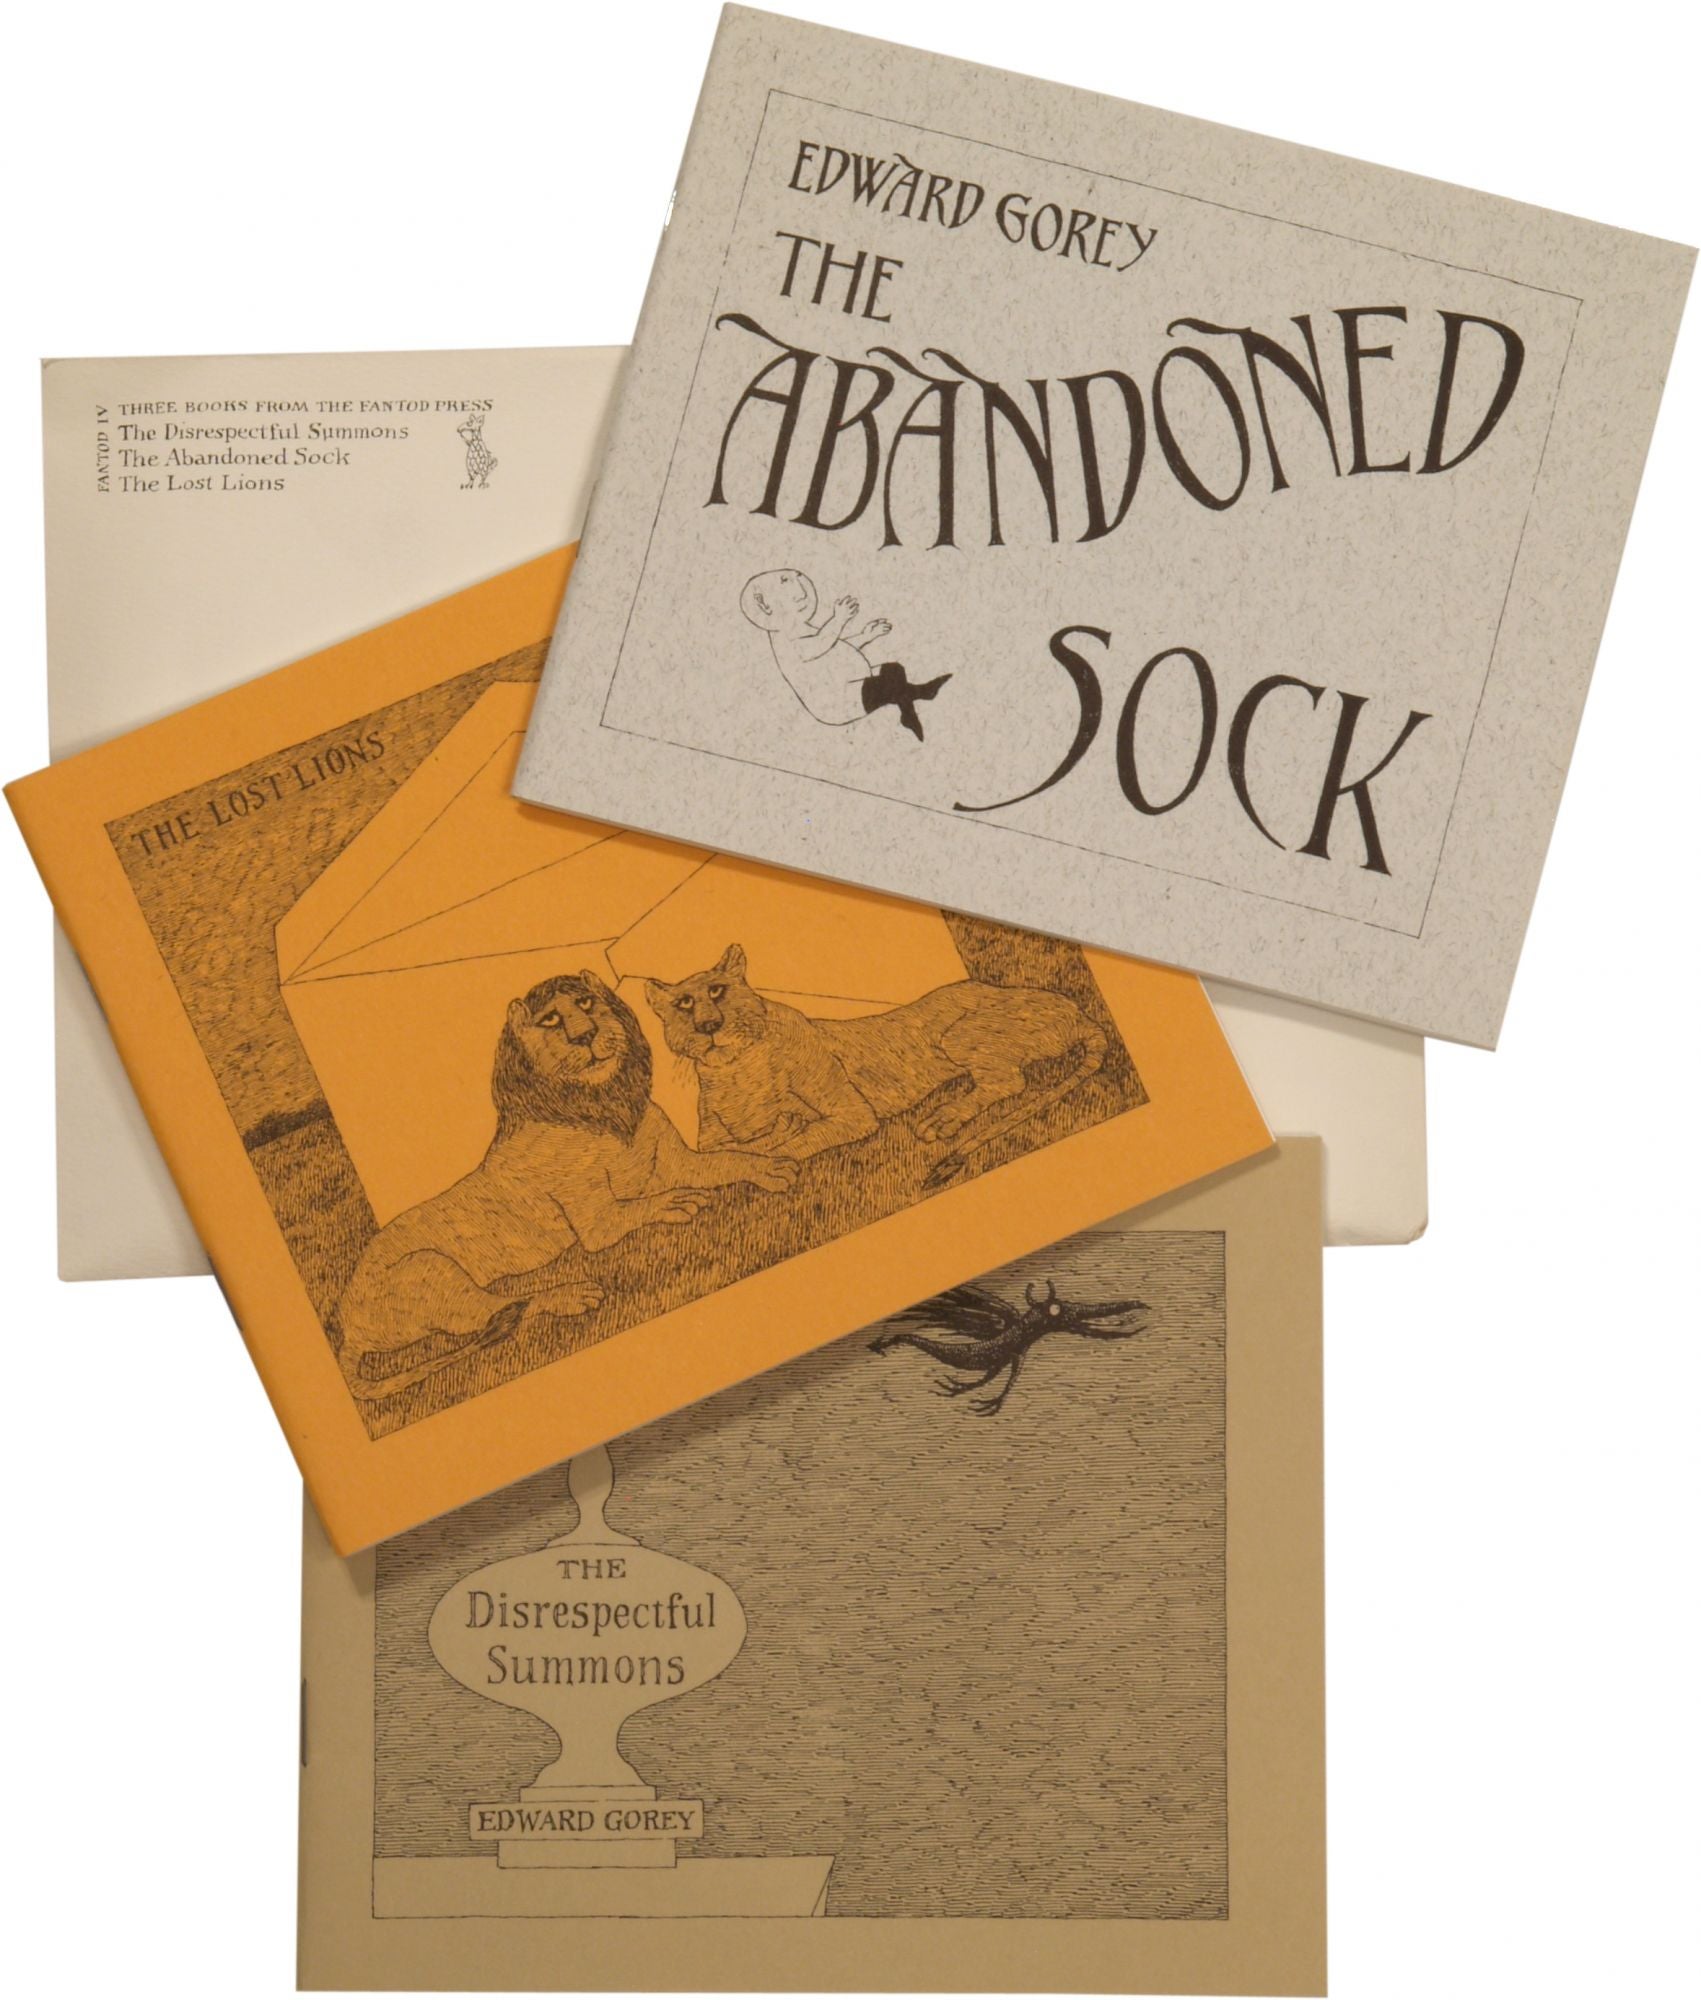 Three Books from the Fantod Press. Fantod IV. The Disrespectful Summons;  The Abandoned Sock; The Lost Lions by Edward GOREY on Biblioctopus Rare  Books